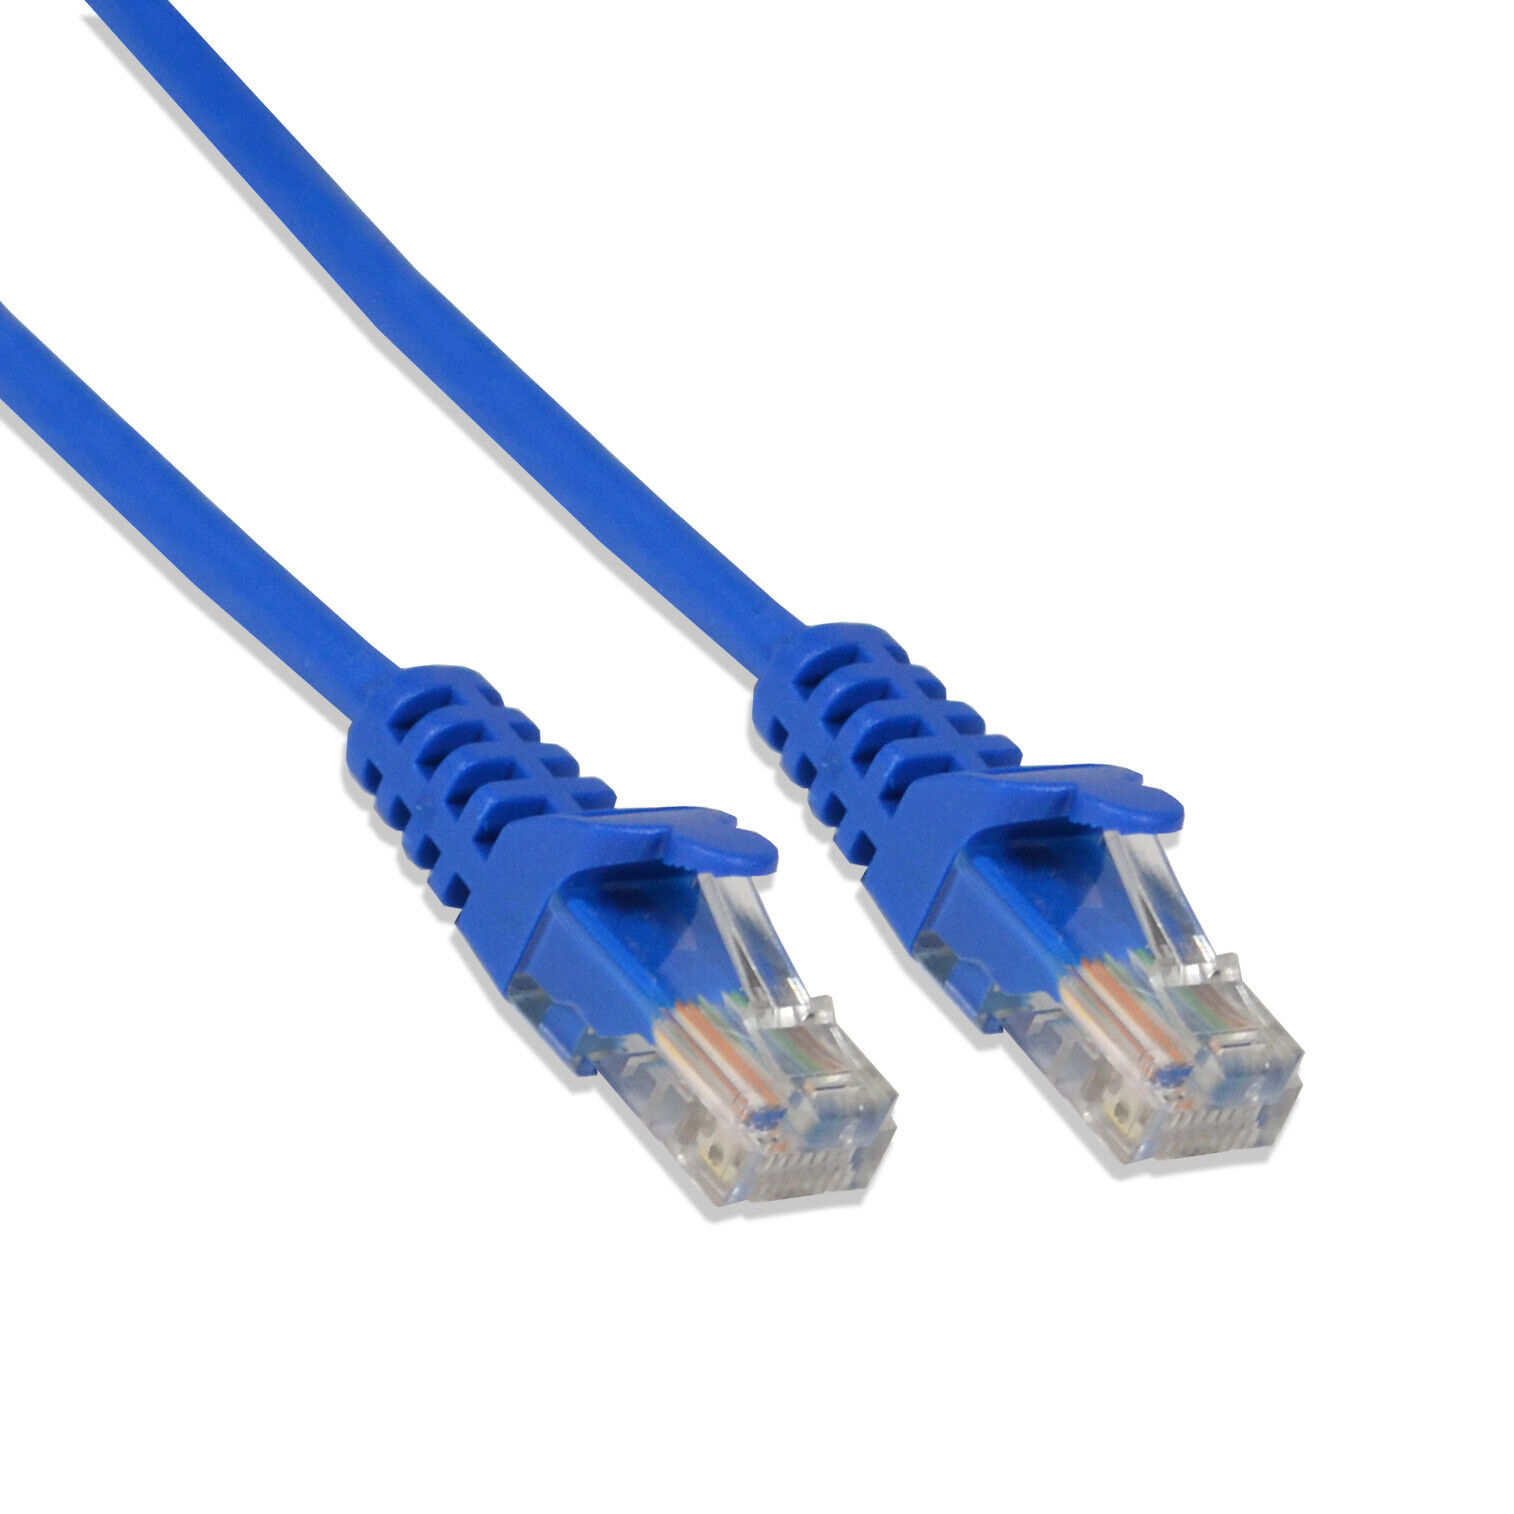 2ft Cat6 Cable Ethernet Lan Network RJ45 Patch Cord Internet Blue (50 Pack)